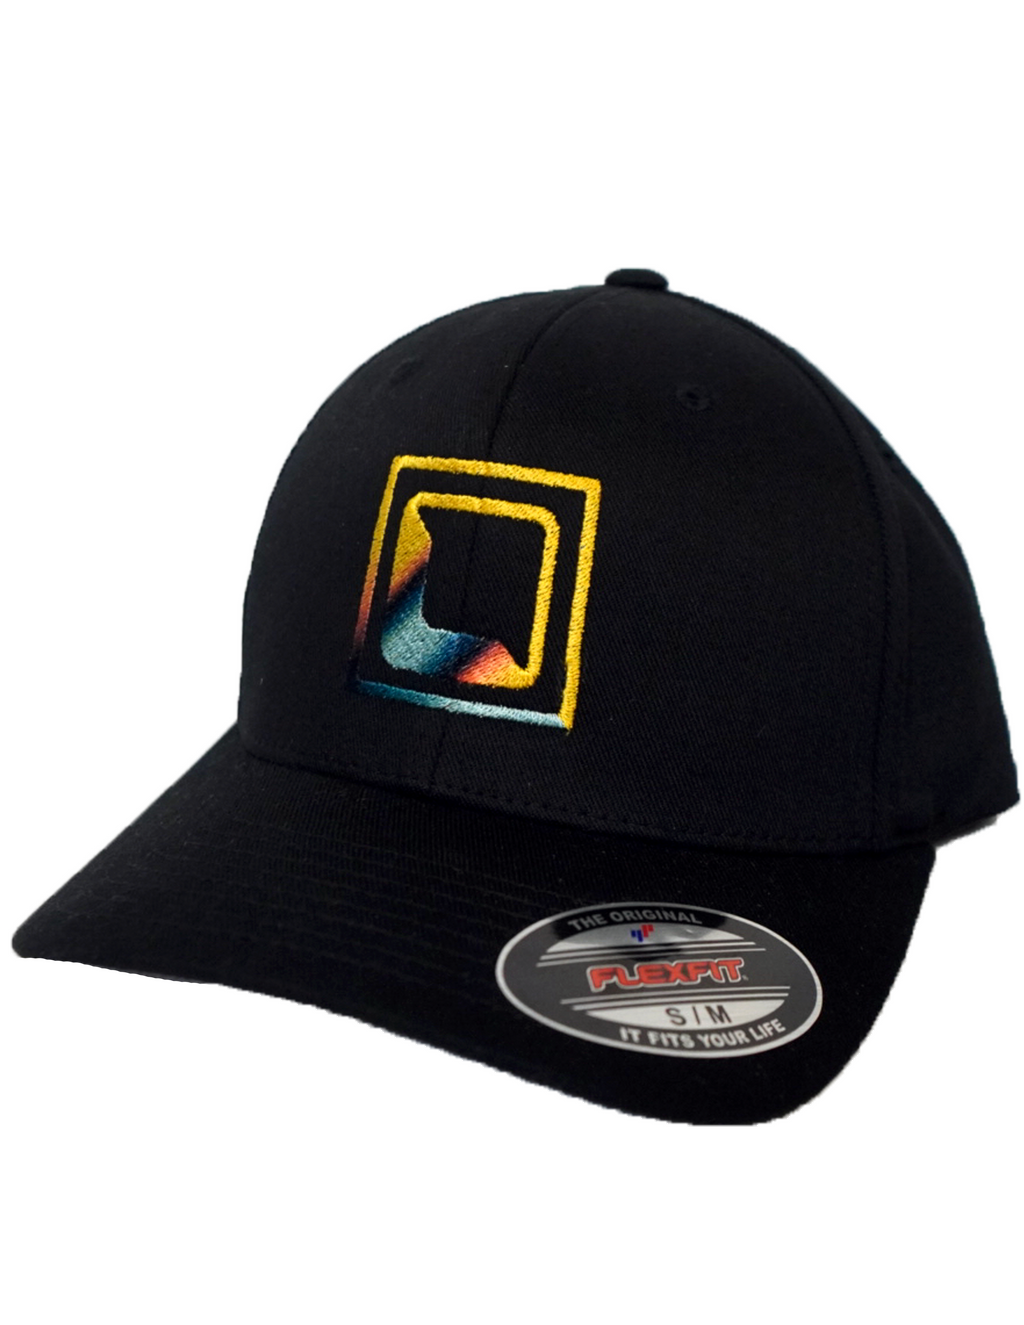 Mainframe Studio's Artist Hats DESIGNED BY THE STREETS